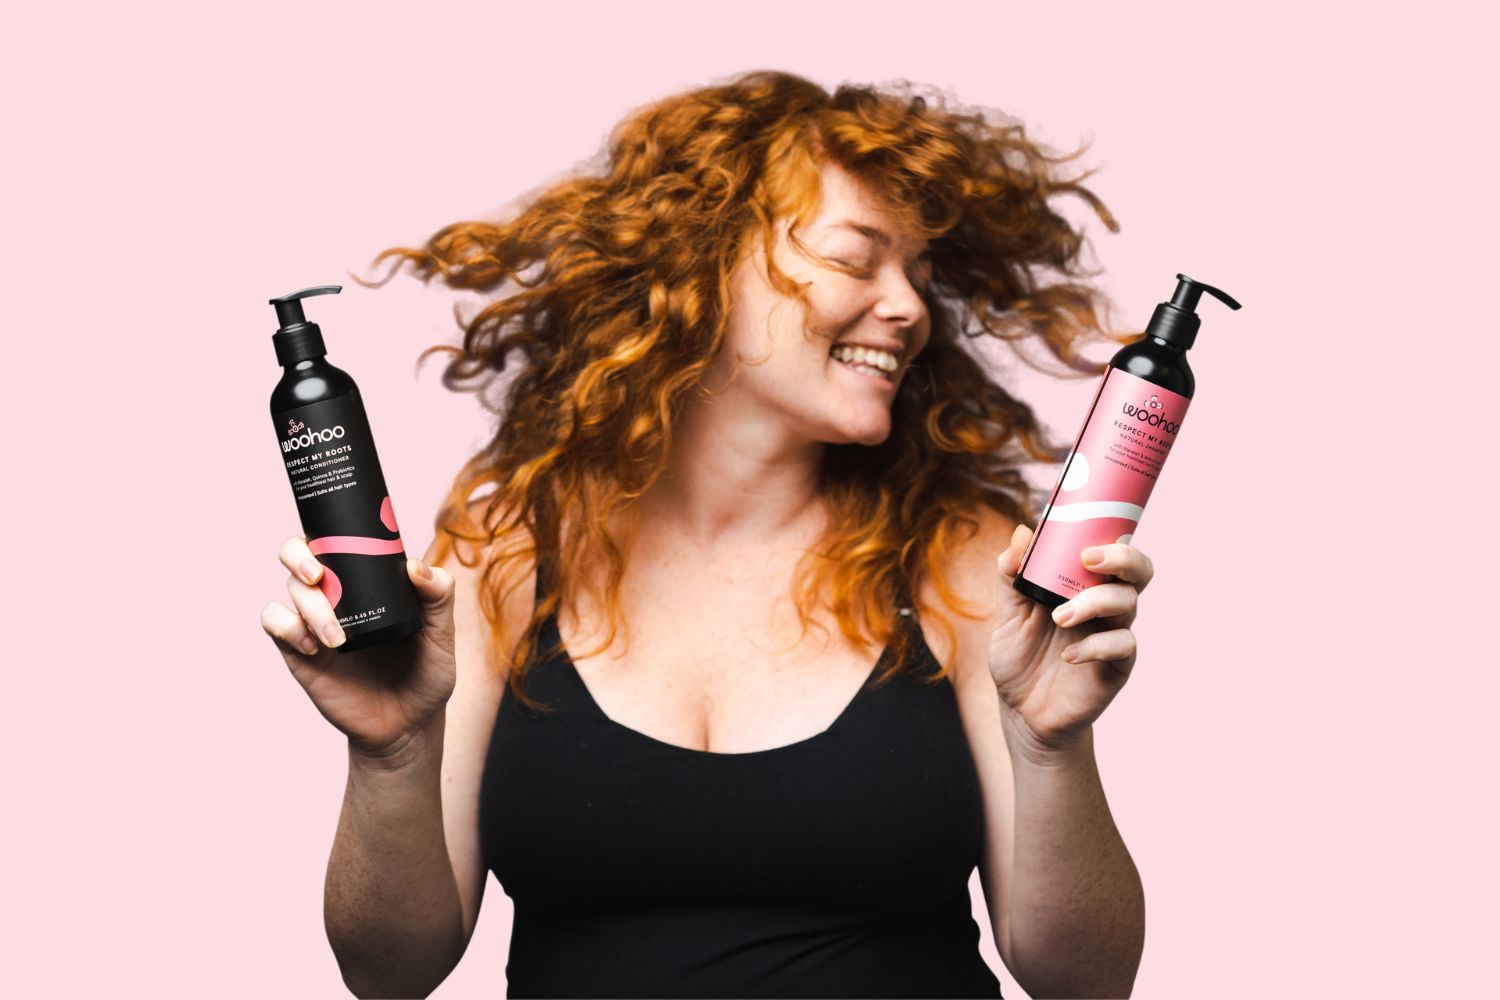 How to use your Woohoo Natural Shampoo and Conditioner